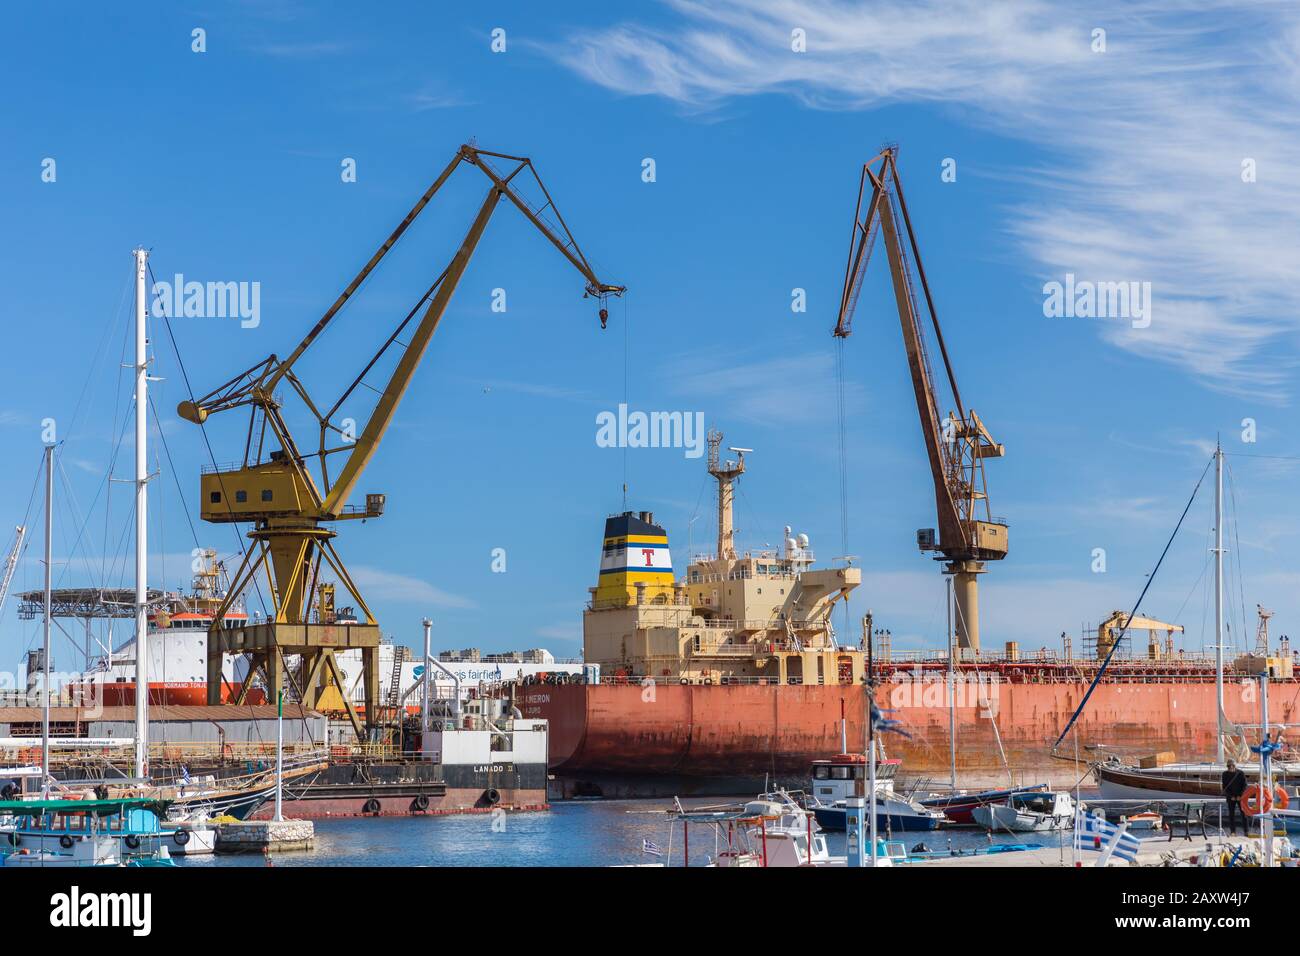 Ermoupolis: February 13th . Two big industrial cranes working on a ship in Neorion Shipyard in Syros. Syros: February 13th, 2020, Greece. Stock Photo